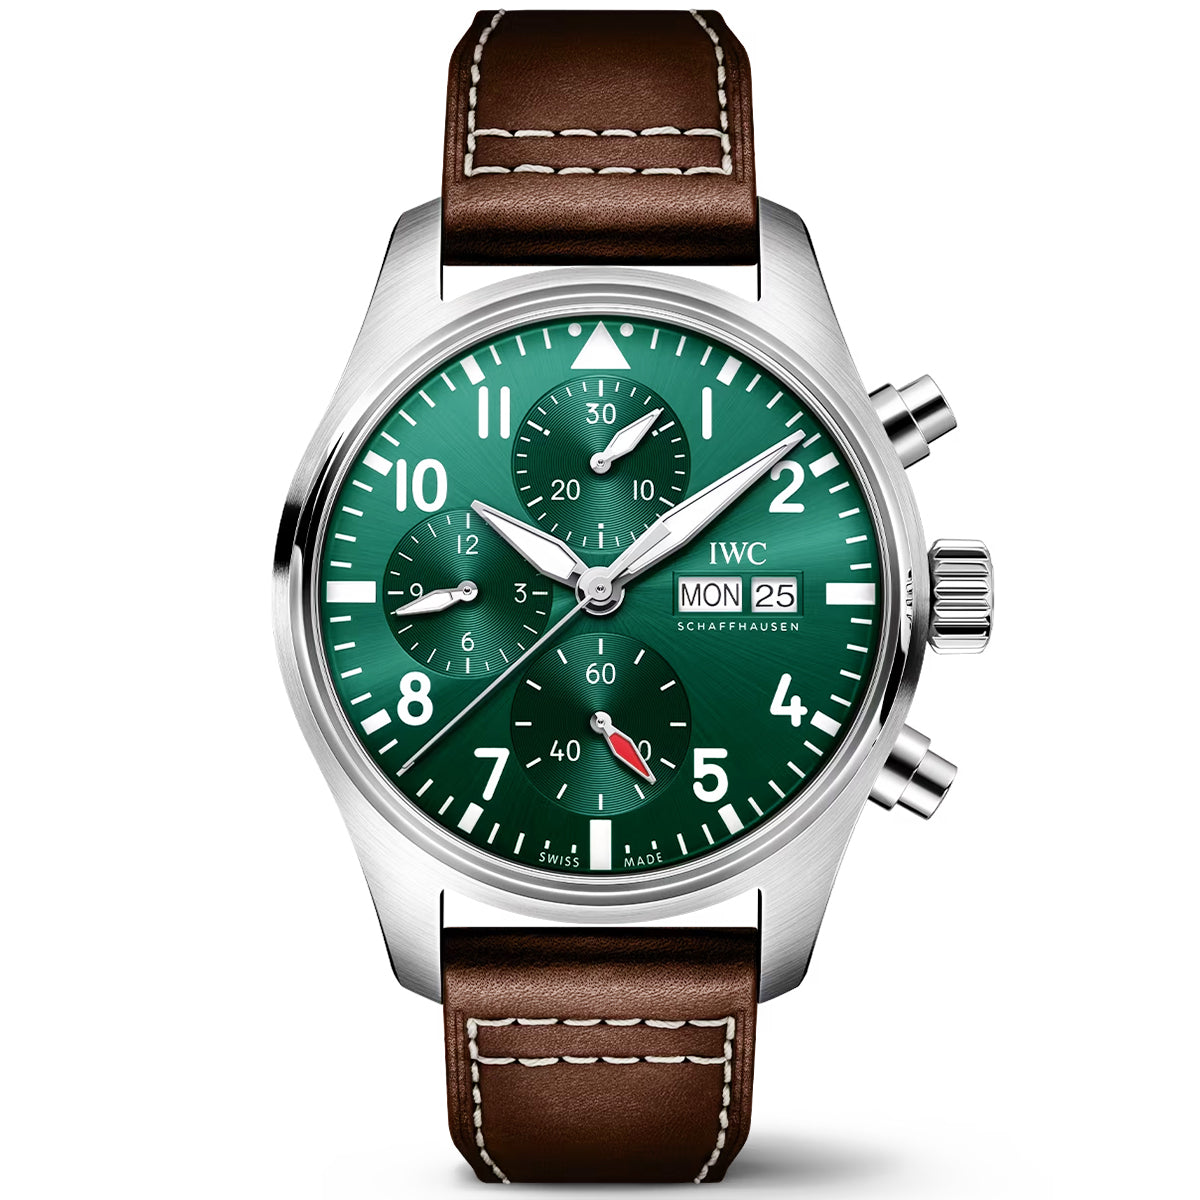 Pilot's 41mm Green Dial Chronograph Leather Strap Watch